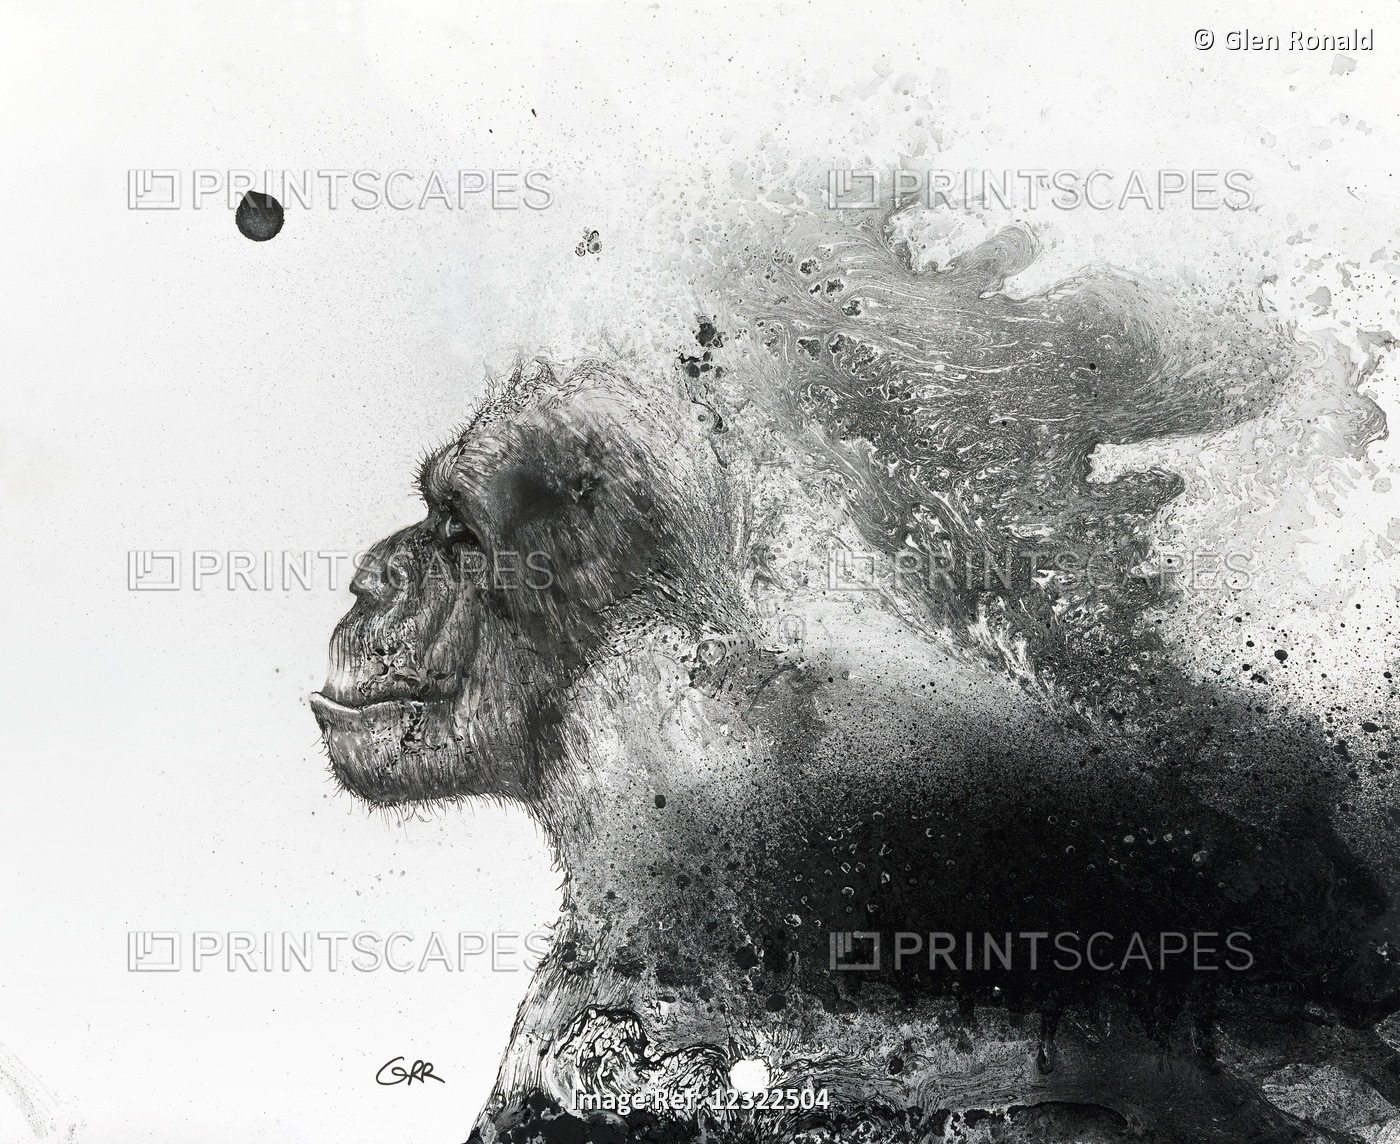 Mist and Mystery, Black and White Artwork Of The Profile Of A Primate